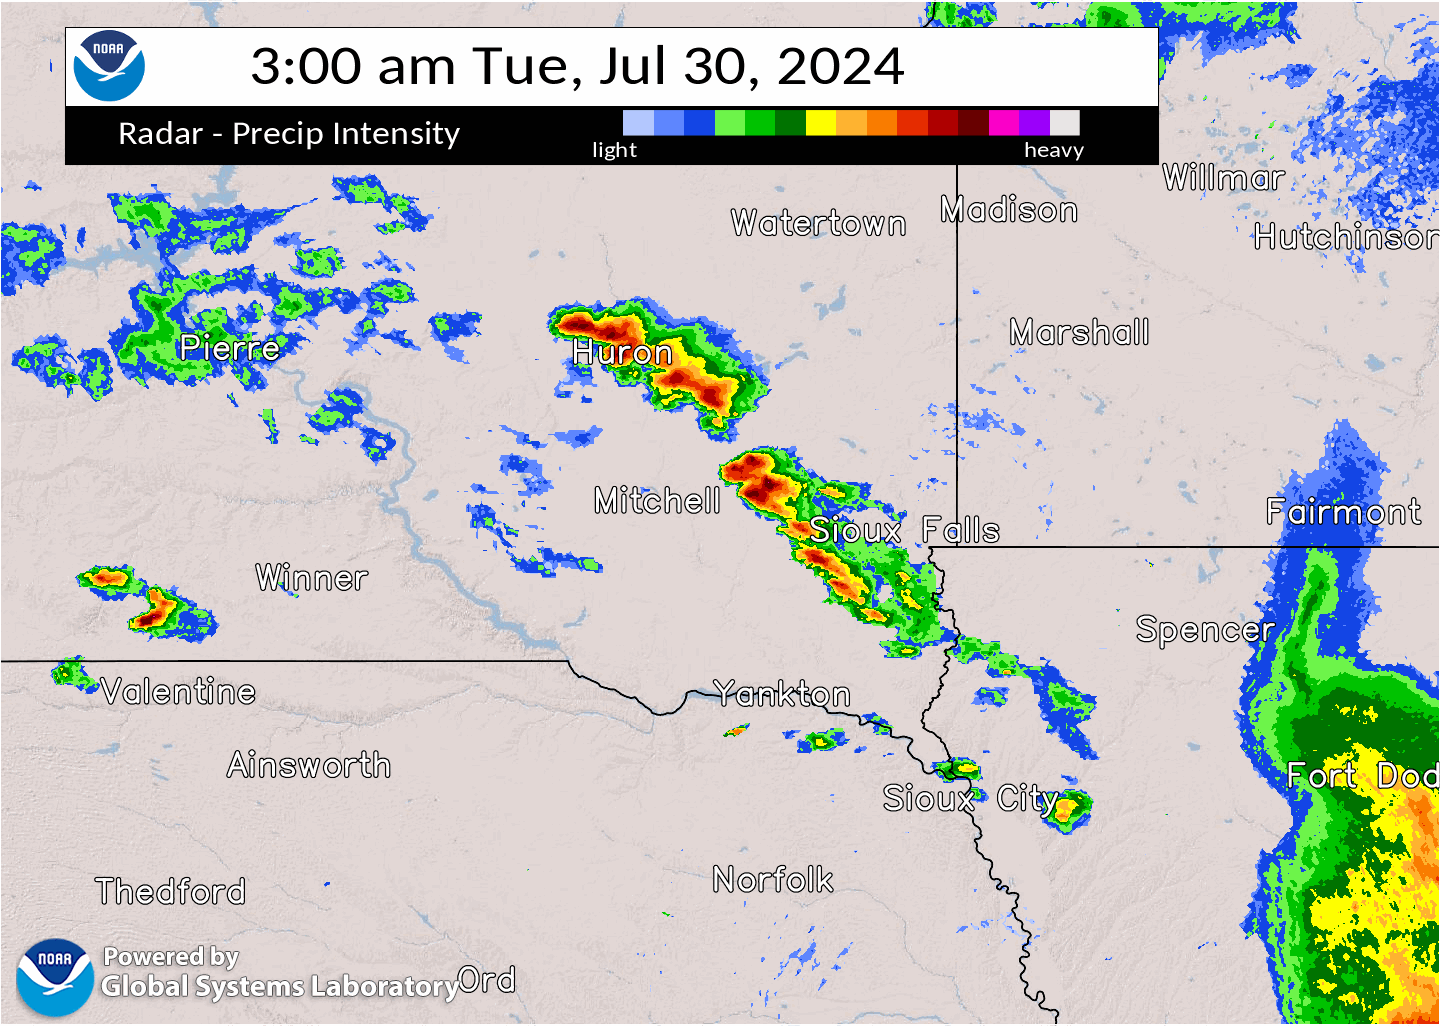 Radar loop from 3 AM through 9 AM Tuesday morning. This loop features a second cluster of storms which developed around Sioux Falls and tracked southeast into northwest Iowa, while an isolated severe storm moves east along Interstate 90 from Chamberlain to west of Sioux Falls.